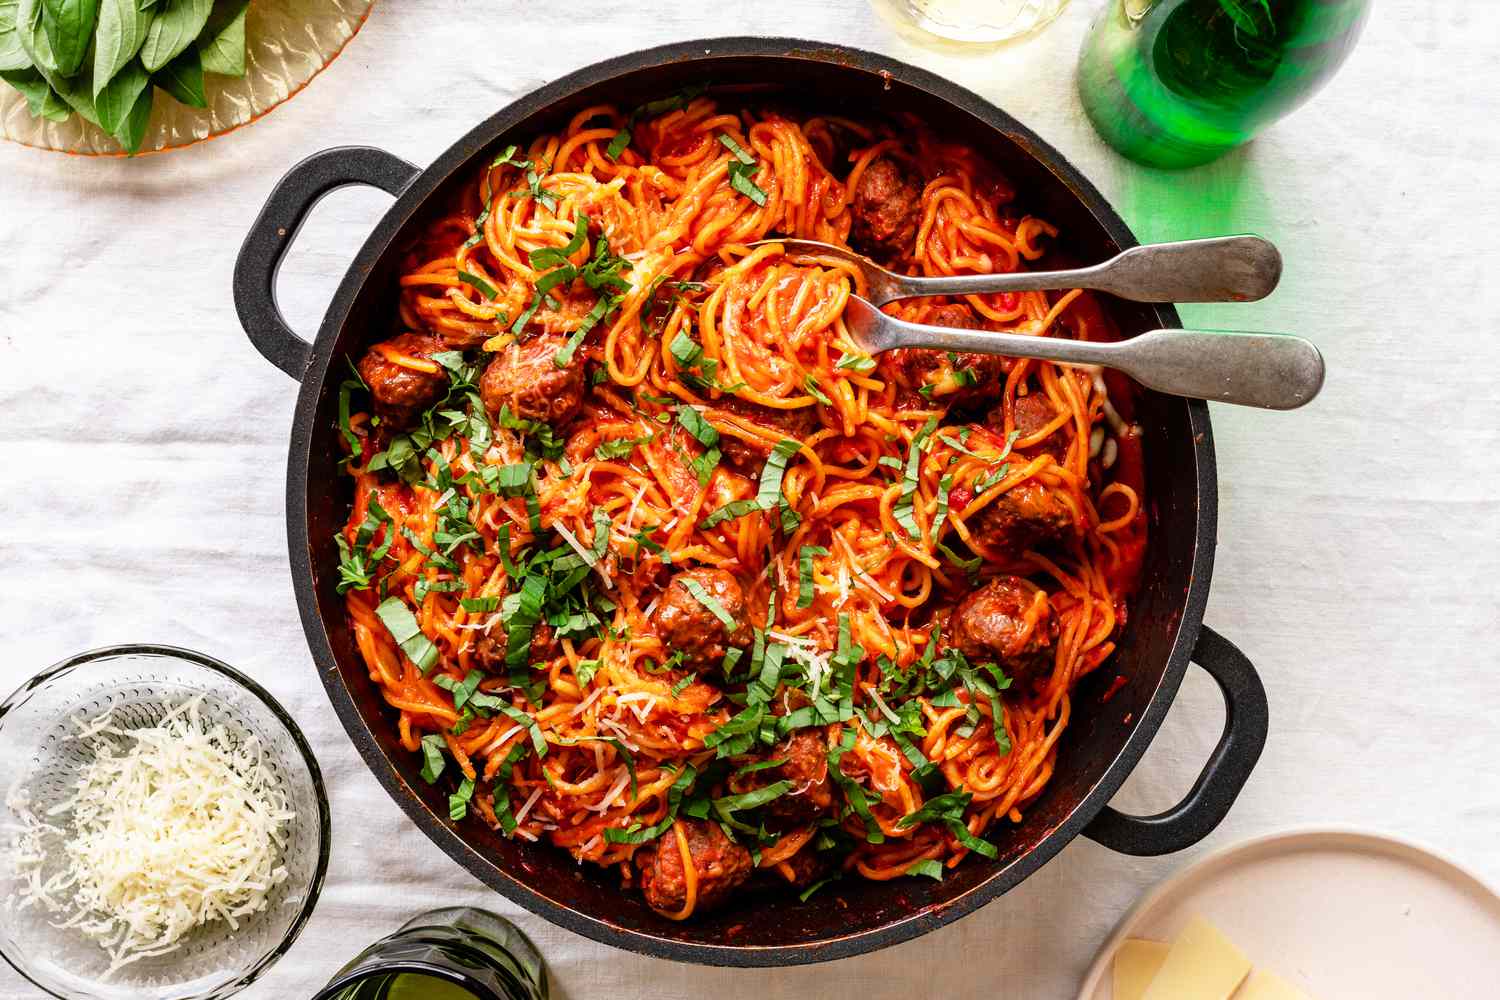 How To Make Spaghetti And Meatballs In Electric Skillet